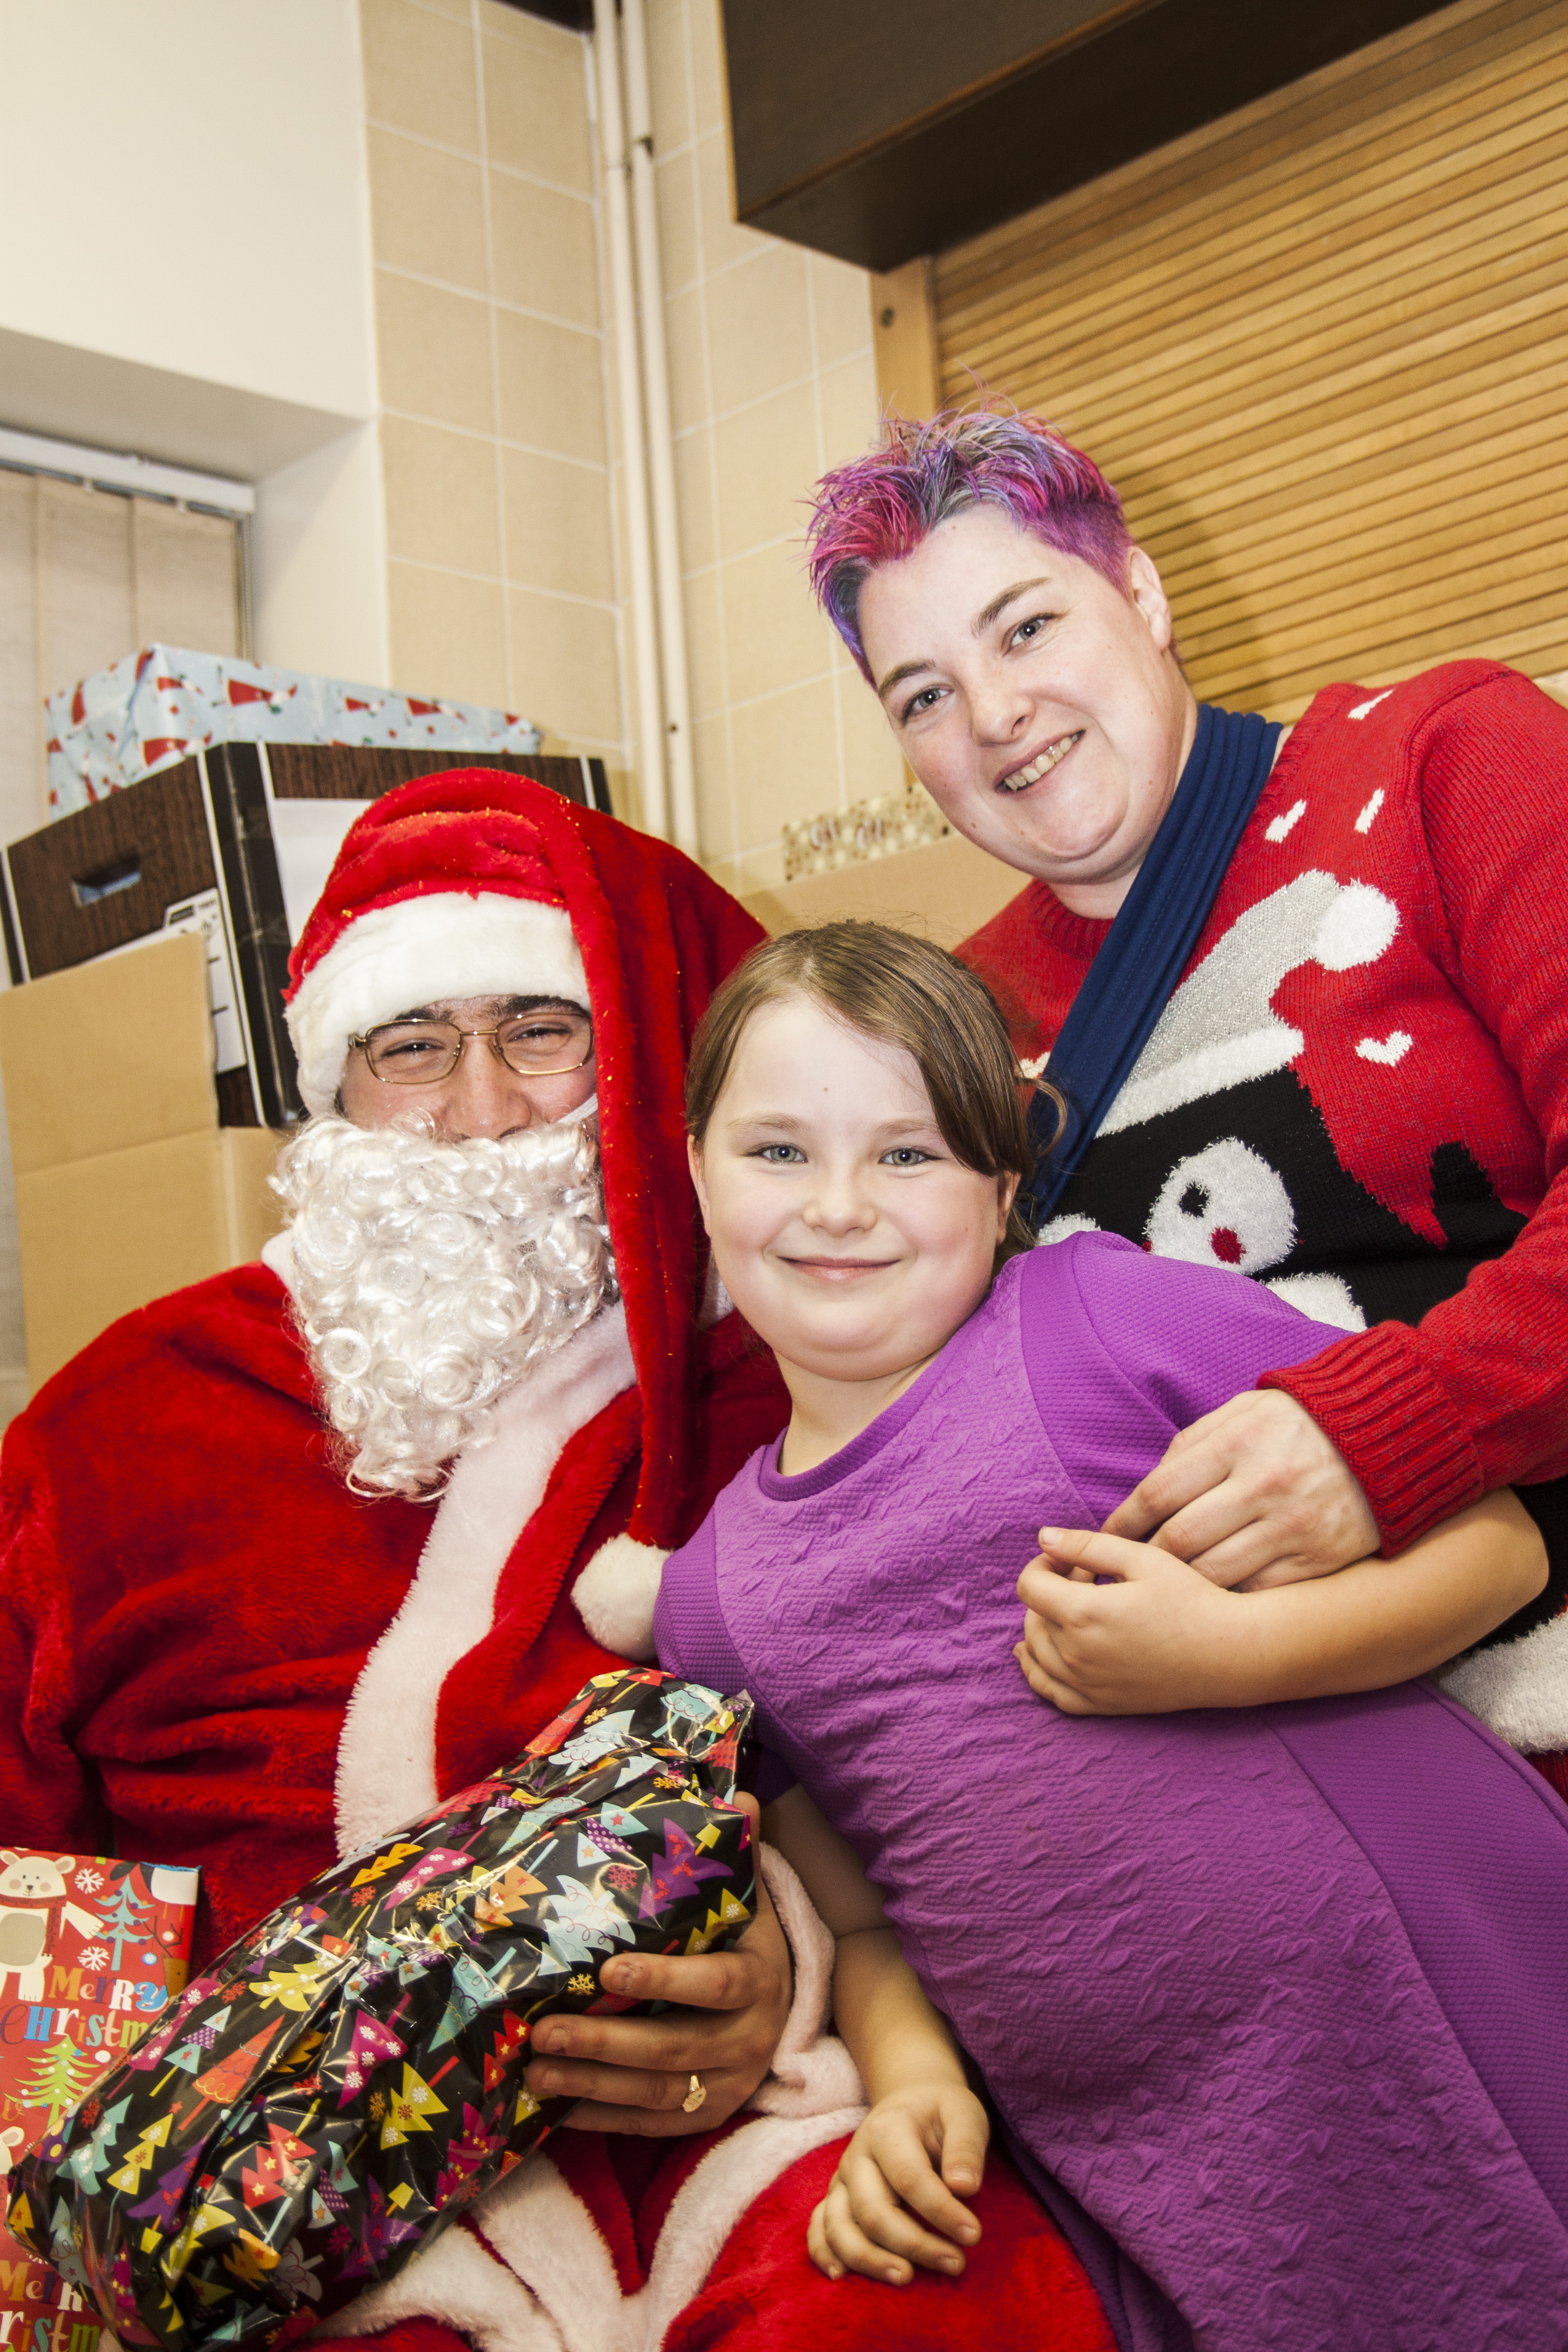 Homeless children received a special festive visit